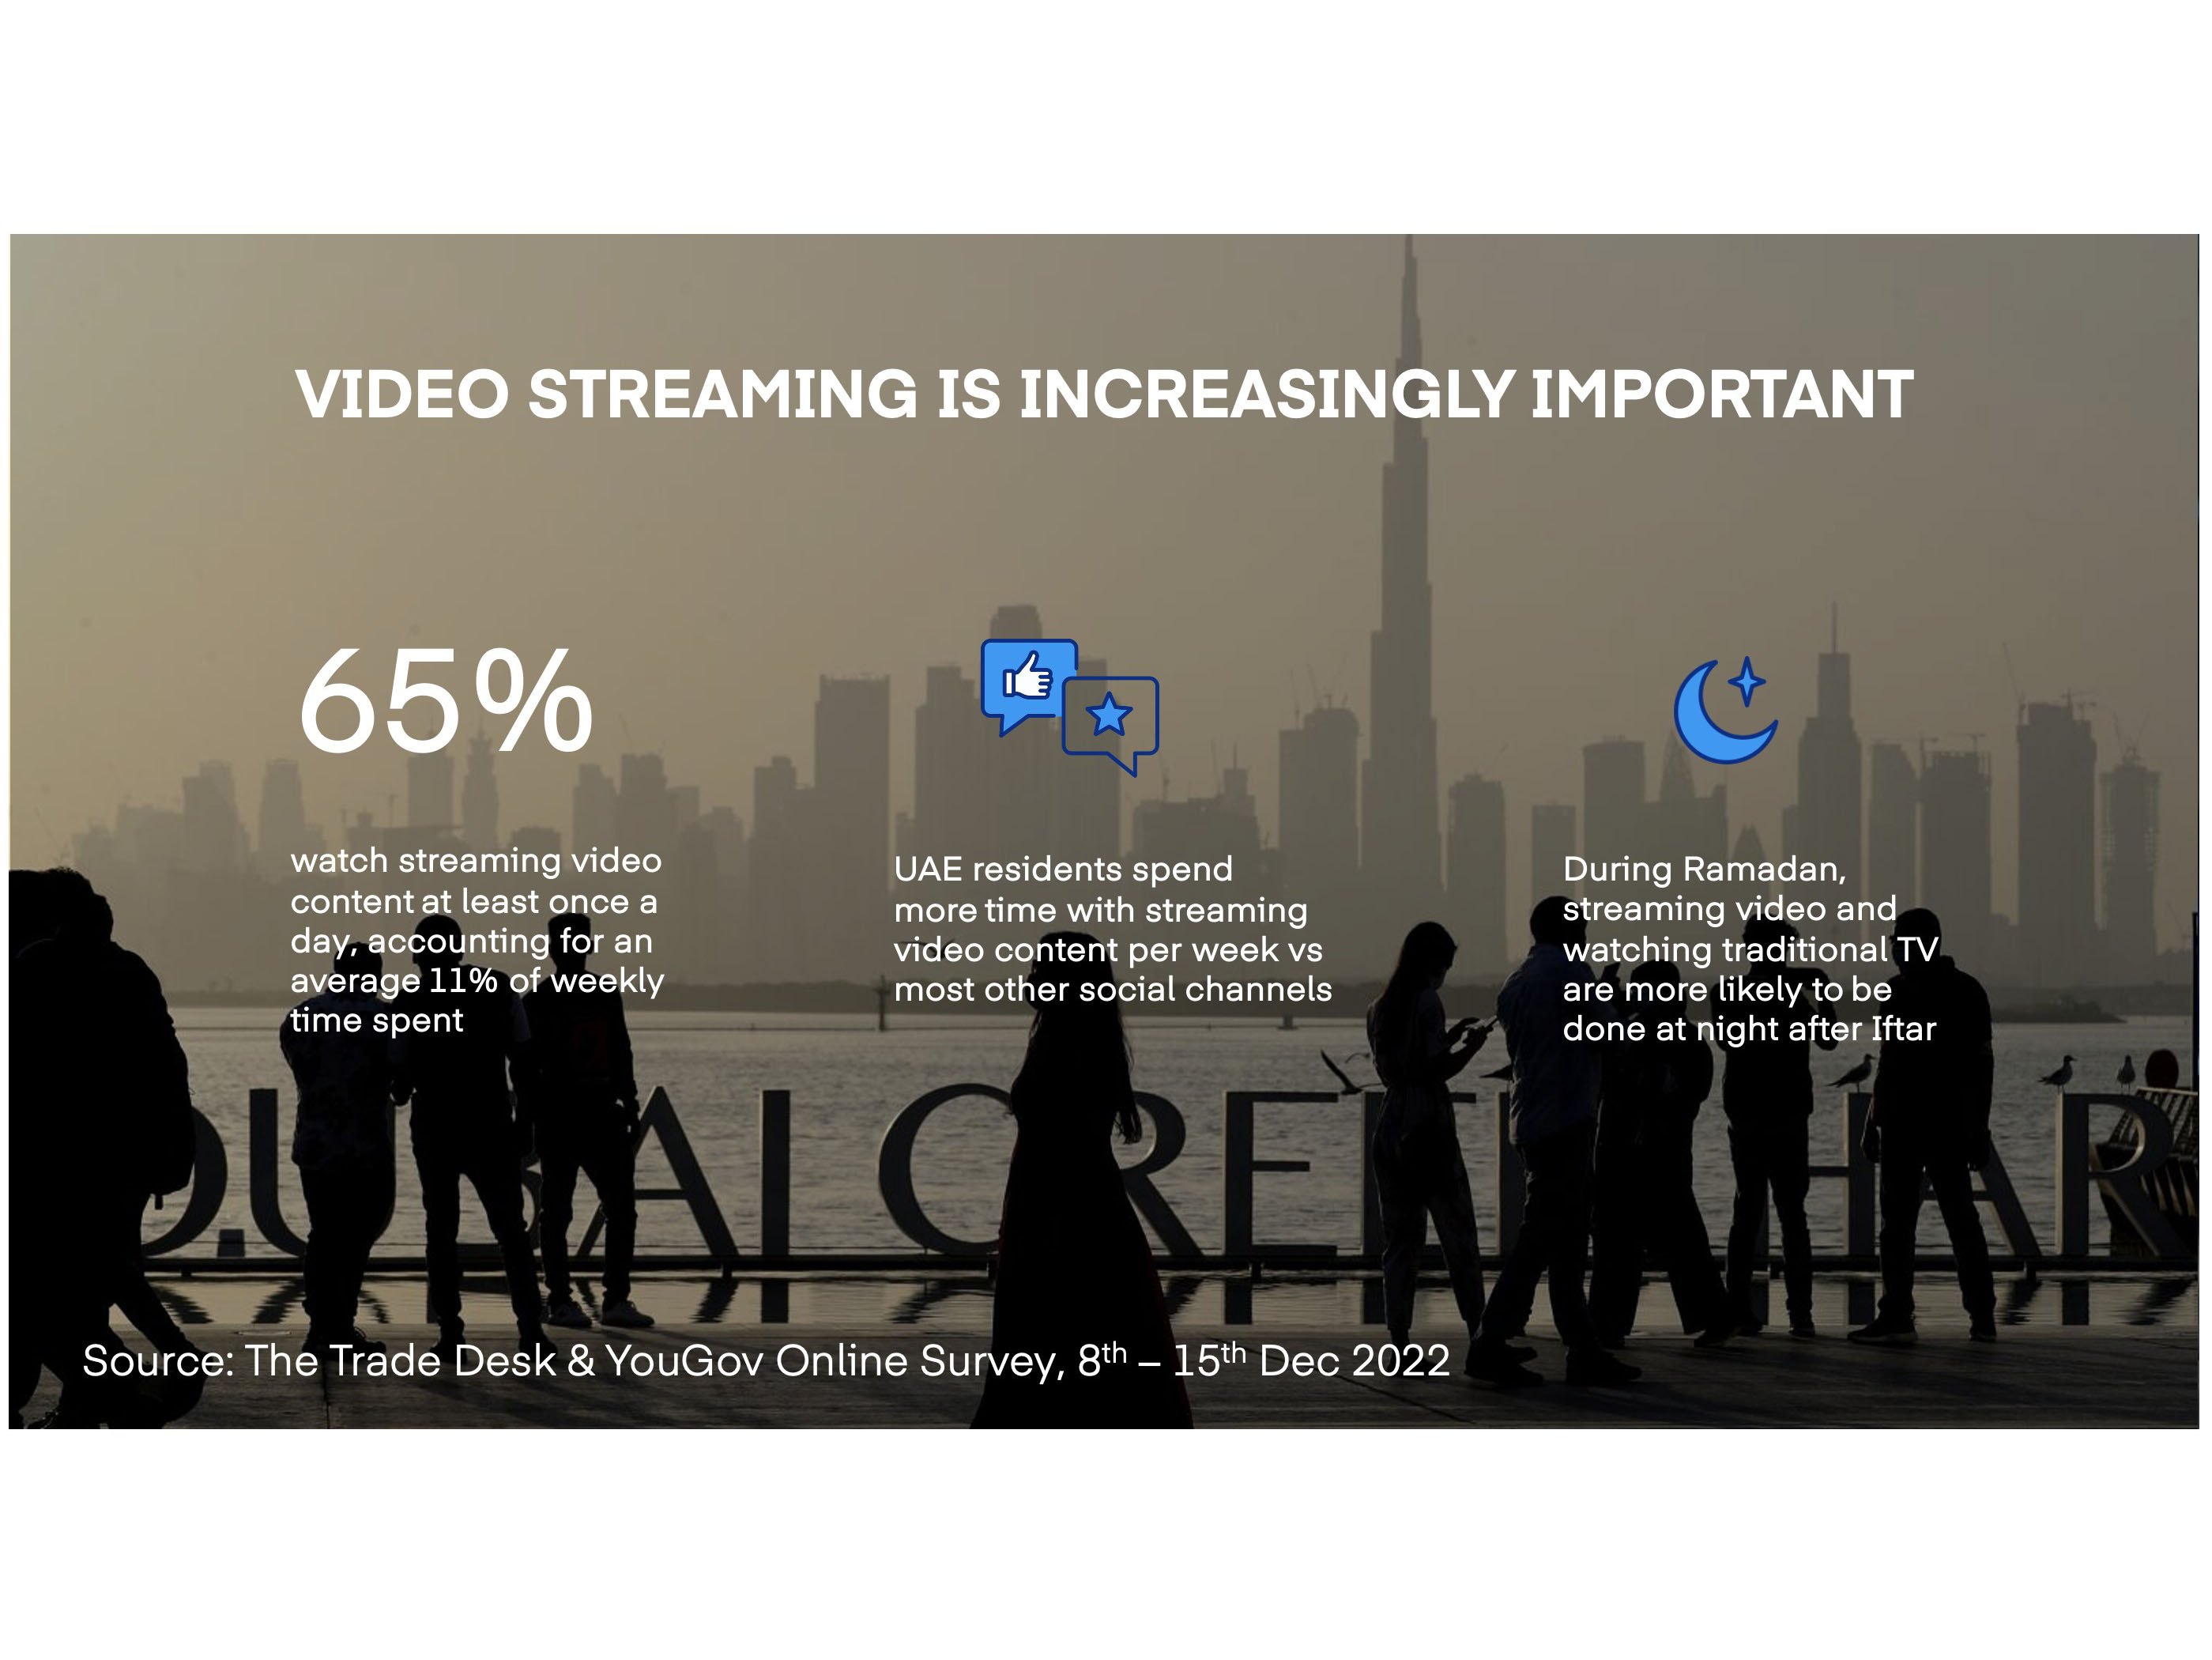 Streaming content, an untapped opportunity for marketers to reach UAE audience during Ramadan